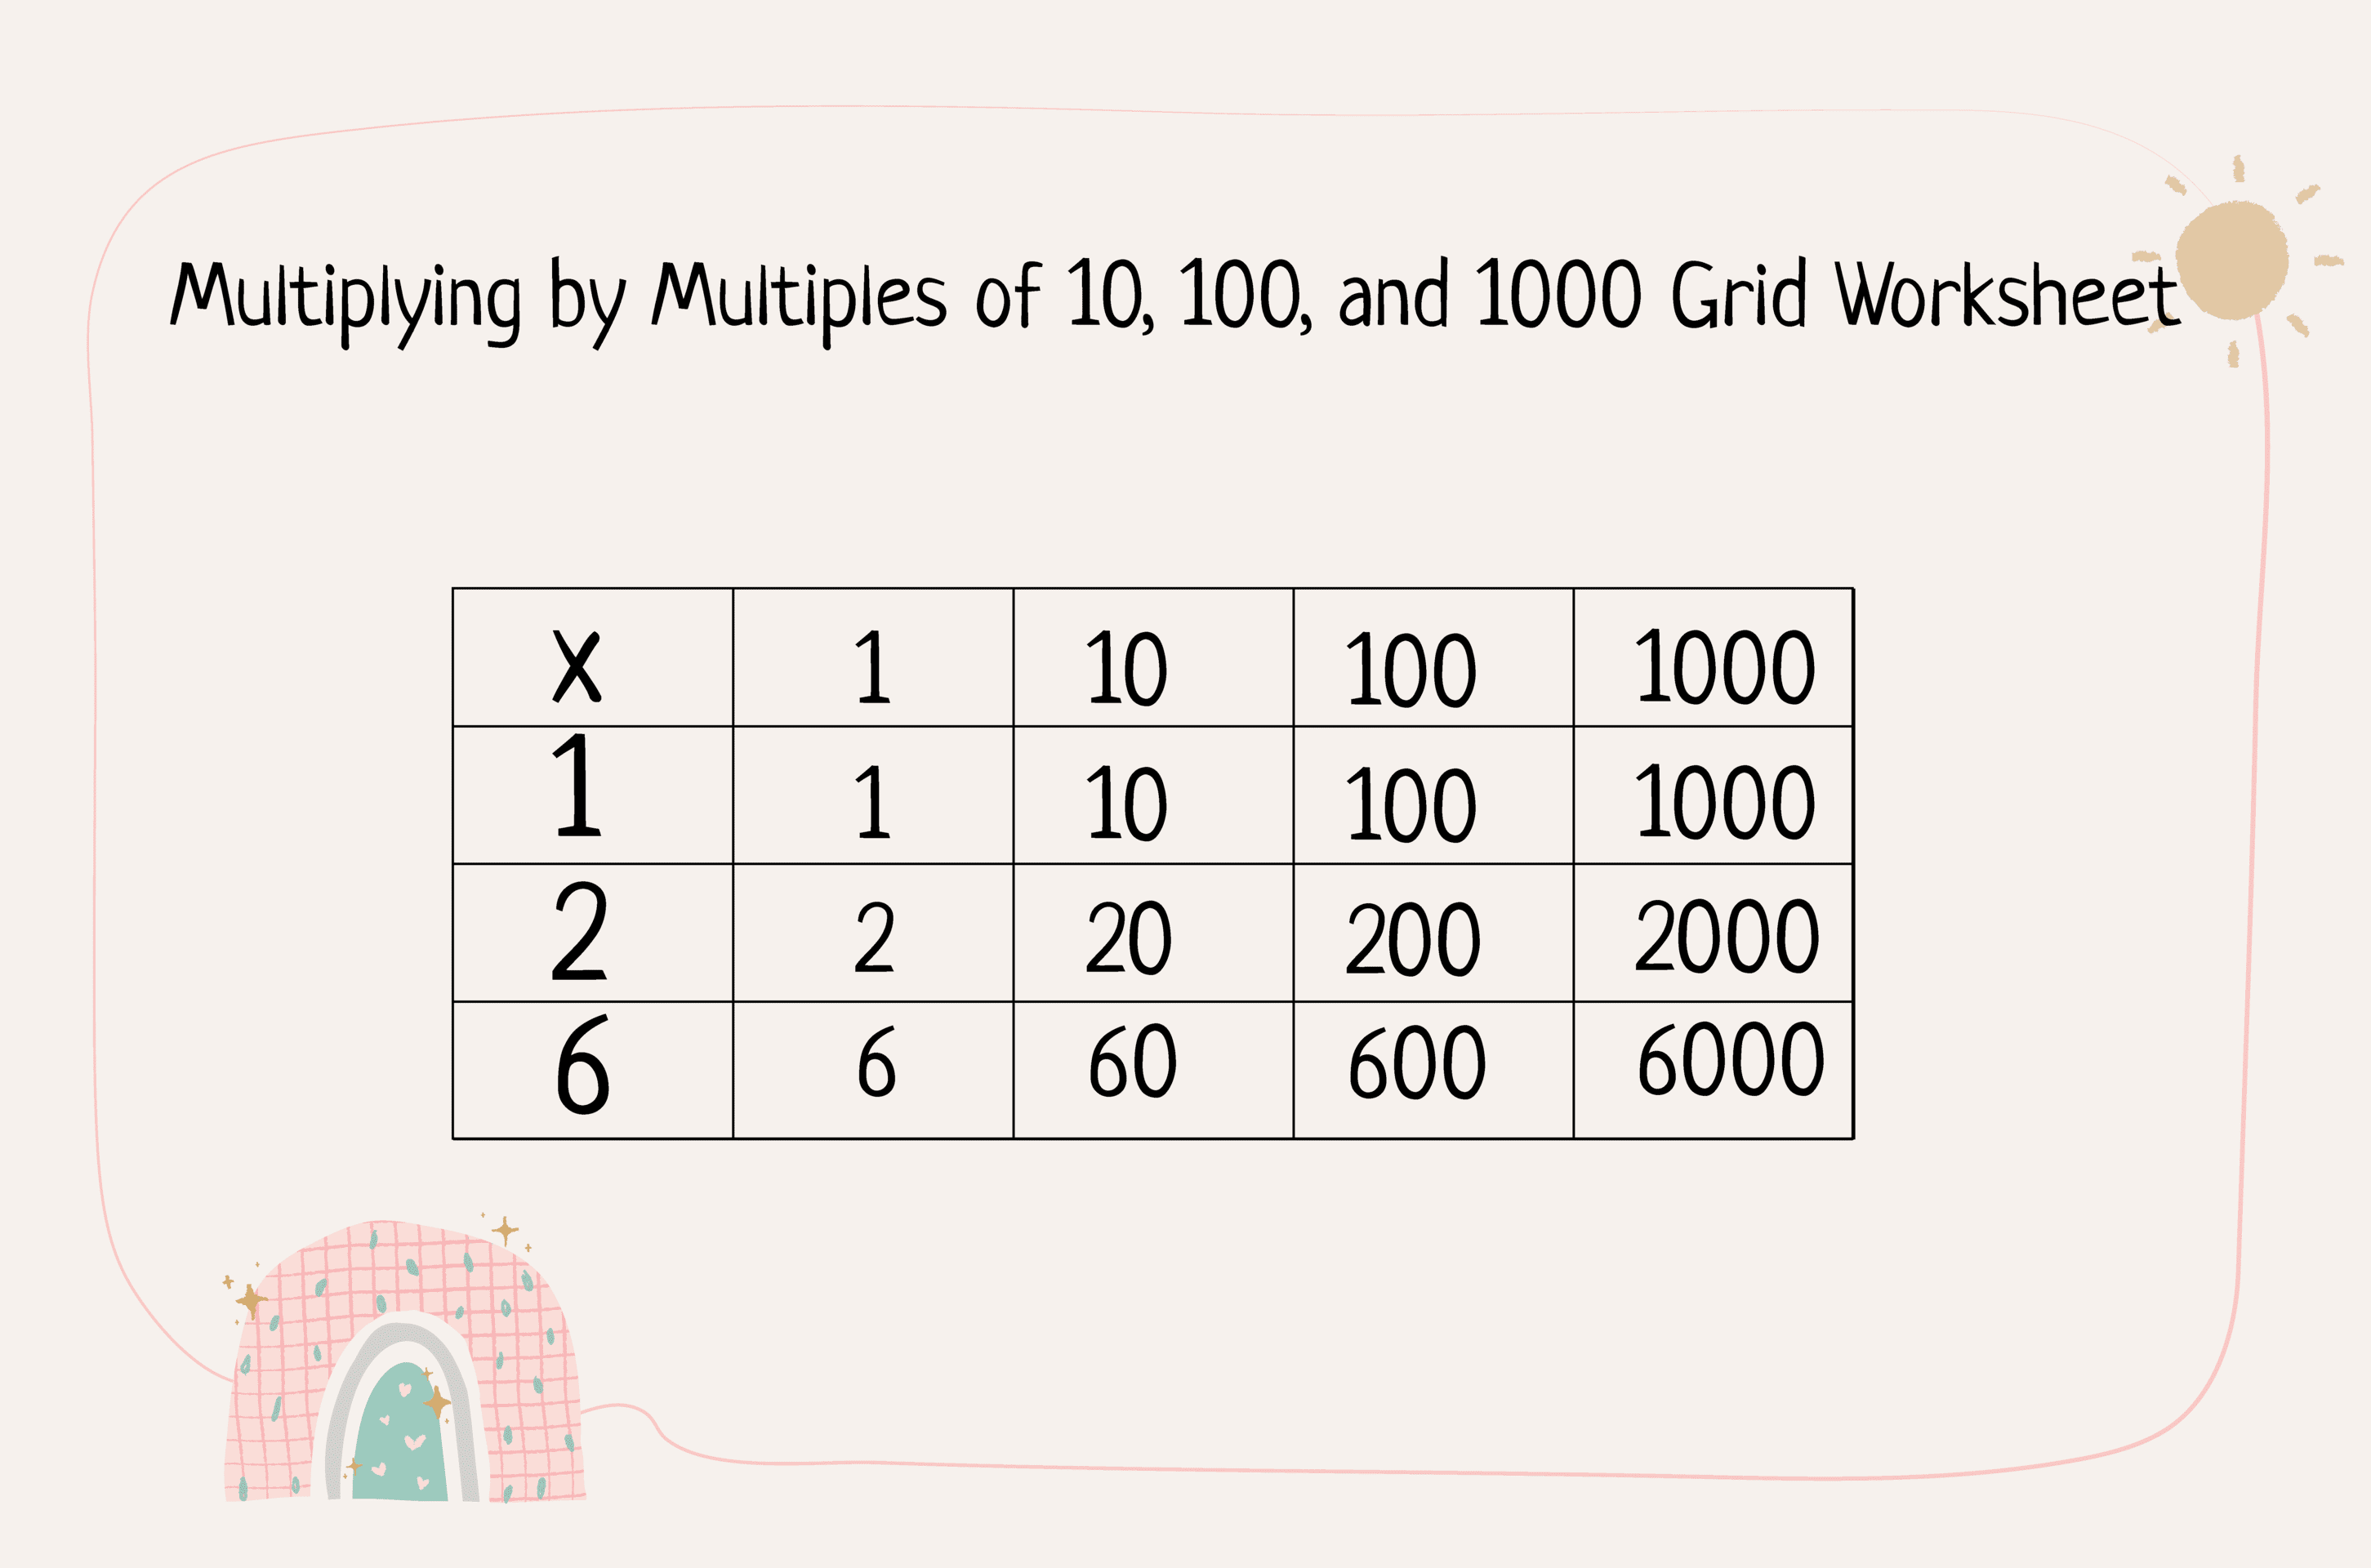 5. Explaining a problem related to multiplying by multiples of 10 100 and 1000